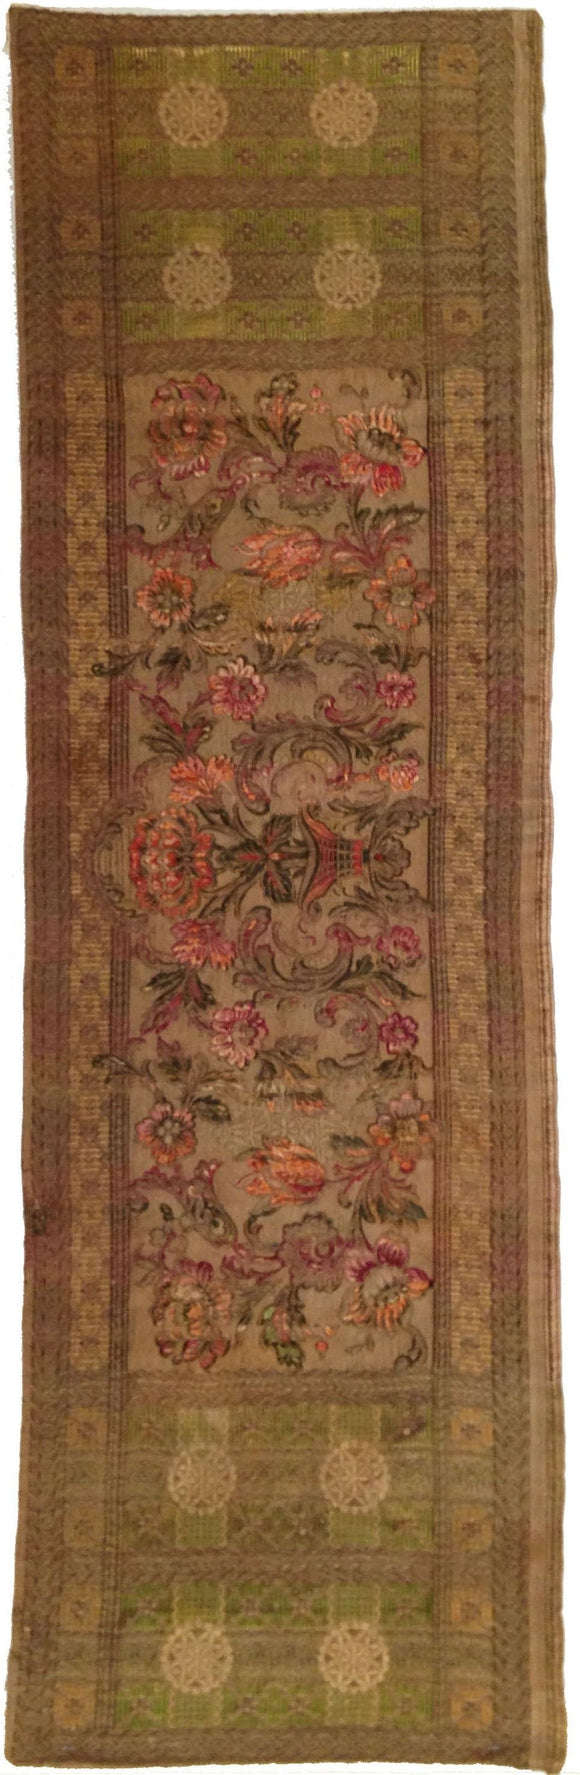 18th Century Embroidery